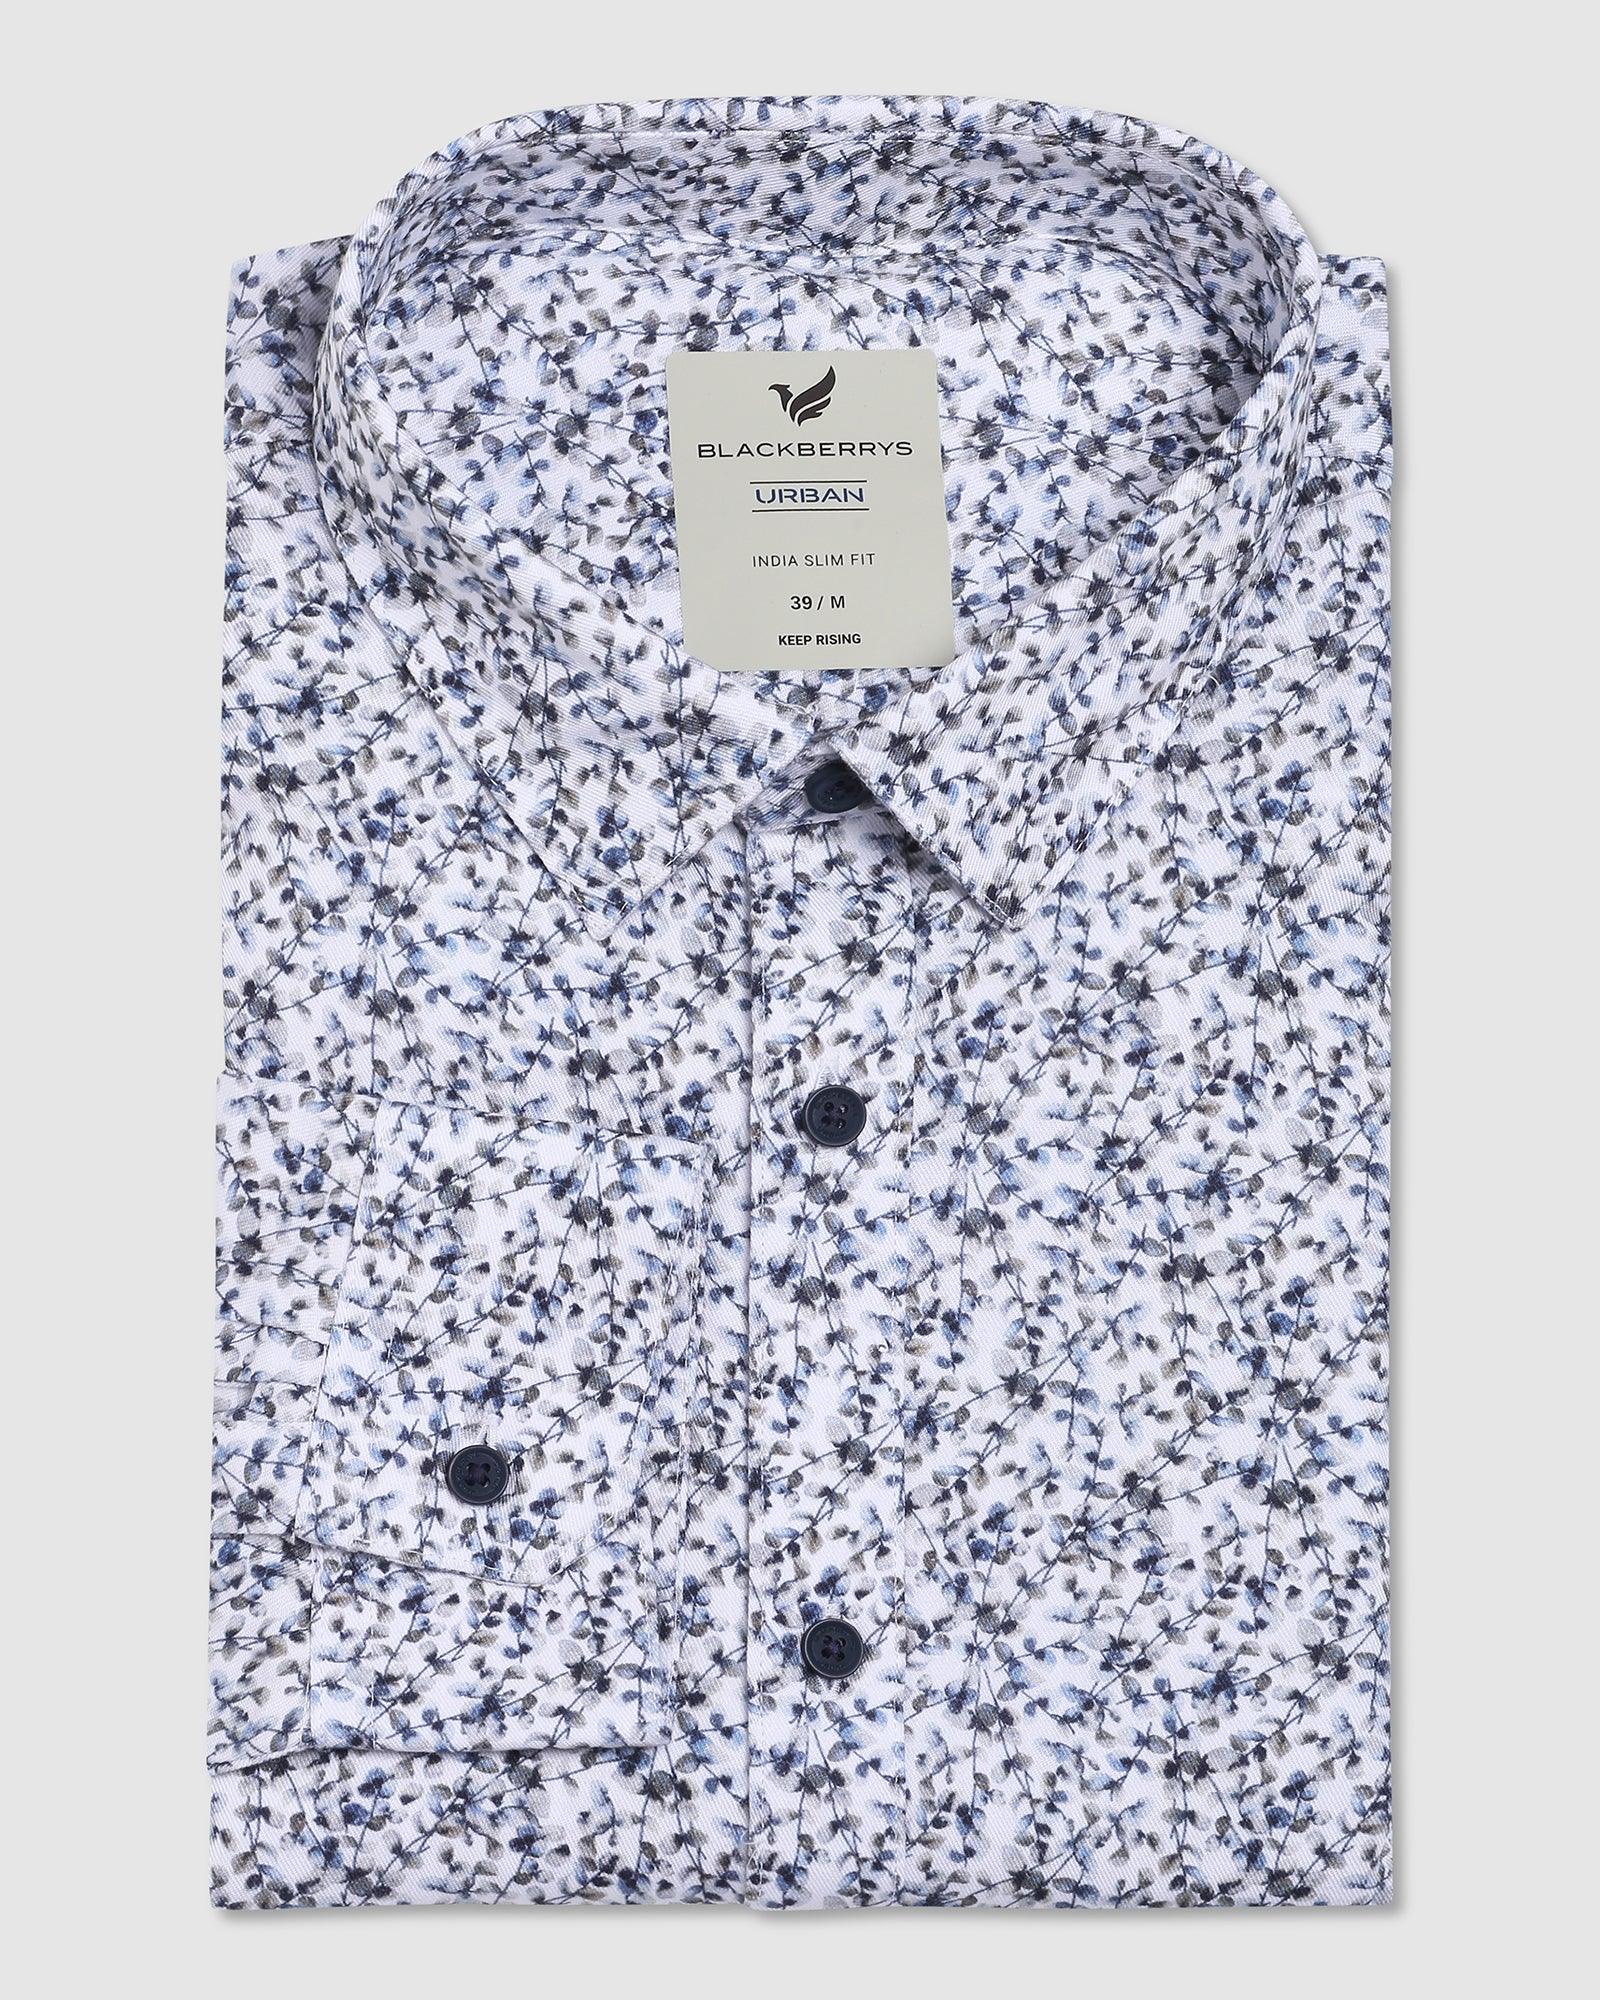 Casual White Printed Shirt - Lister